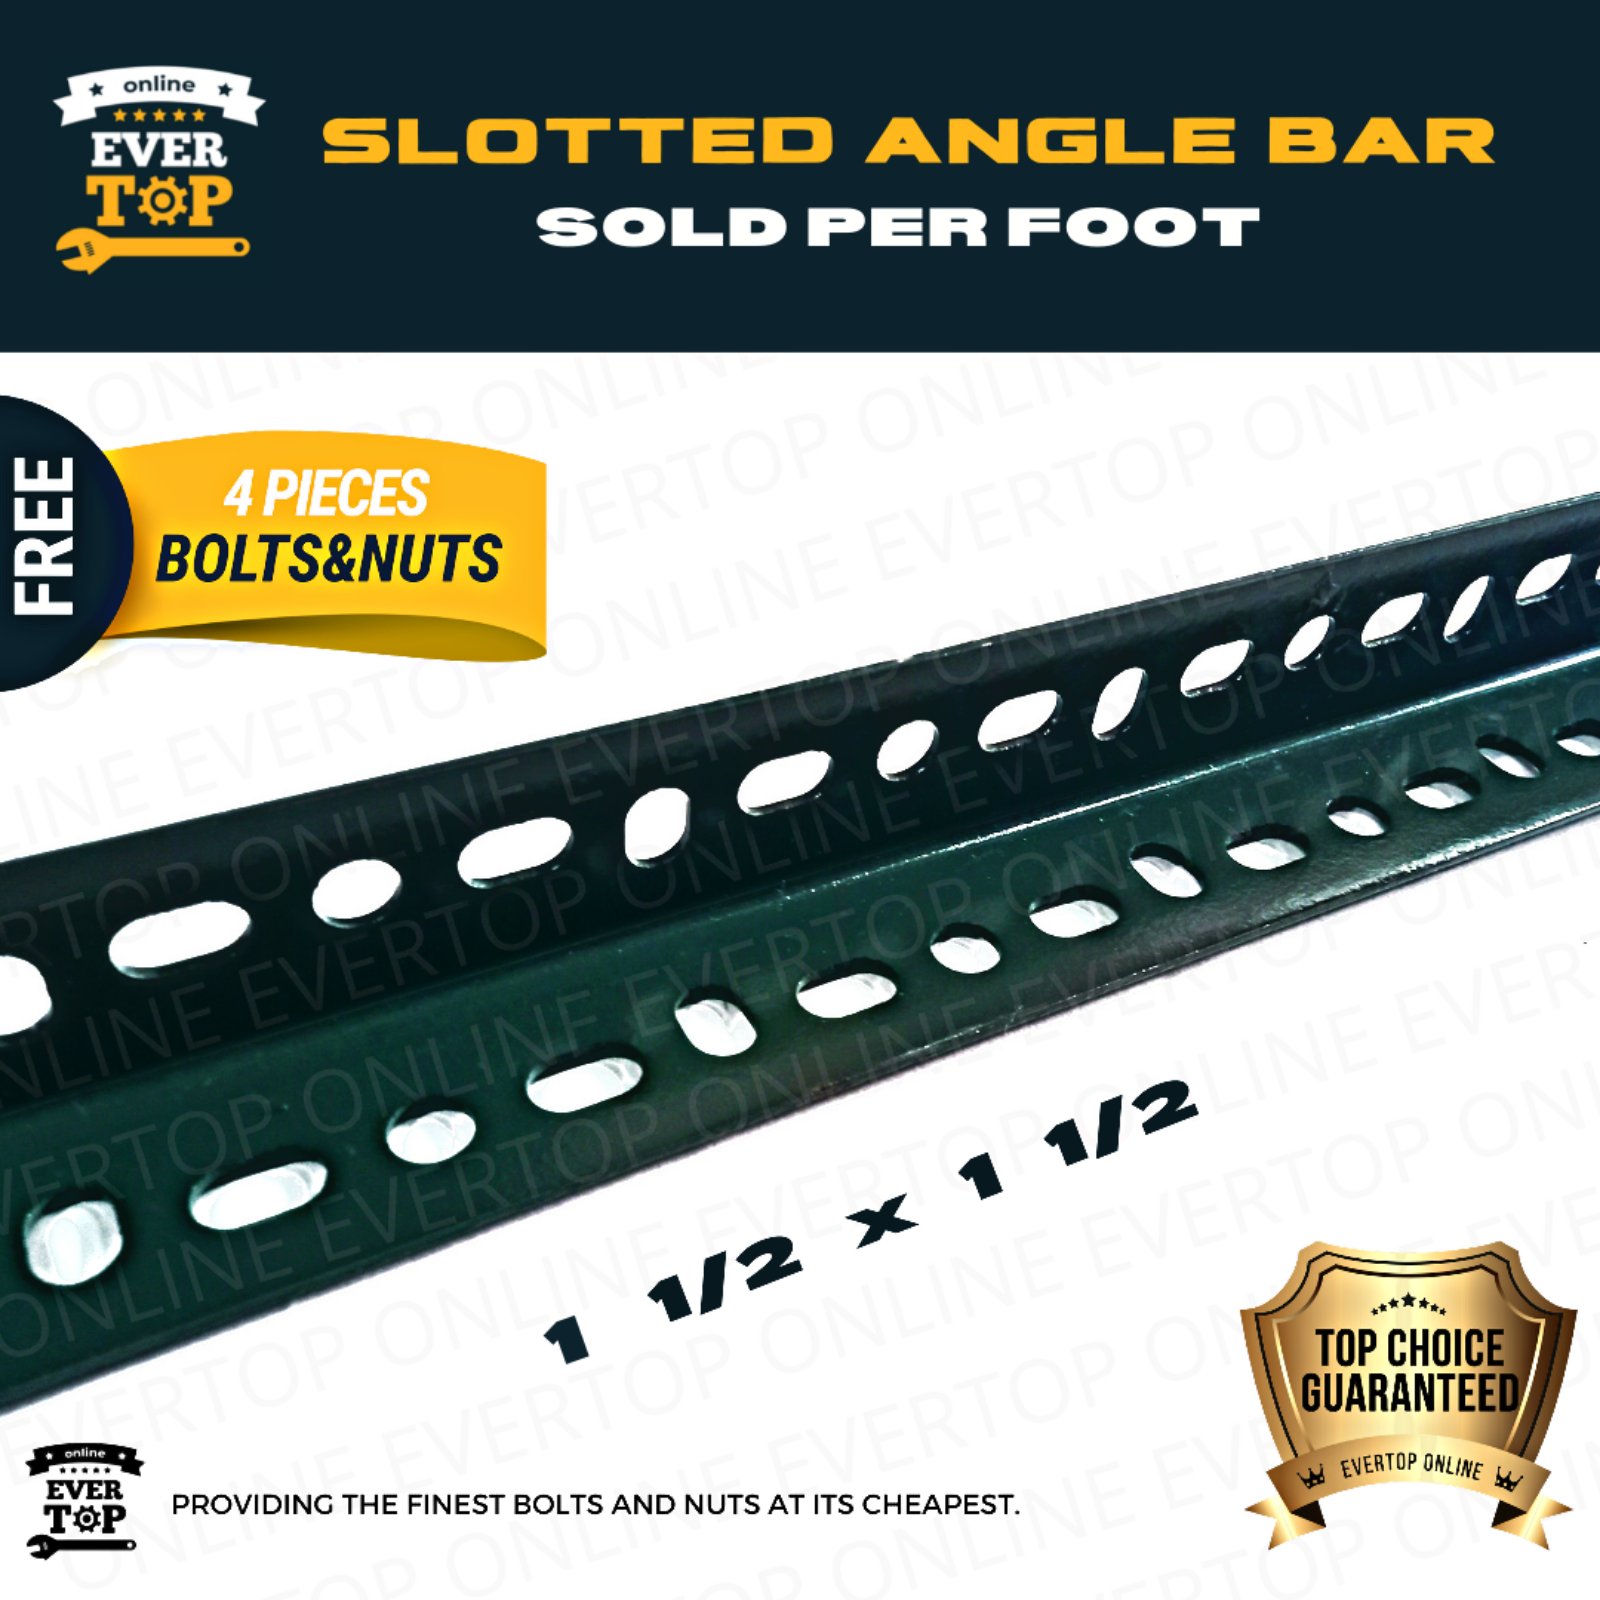 Slotted Angle Bar with Free Bolts & Nuts | EverTop